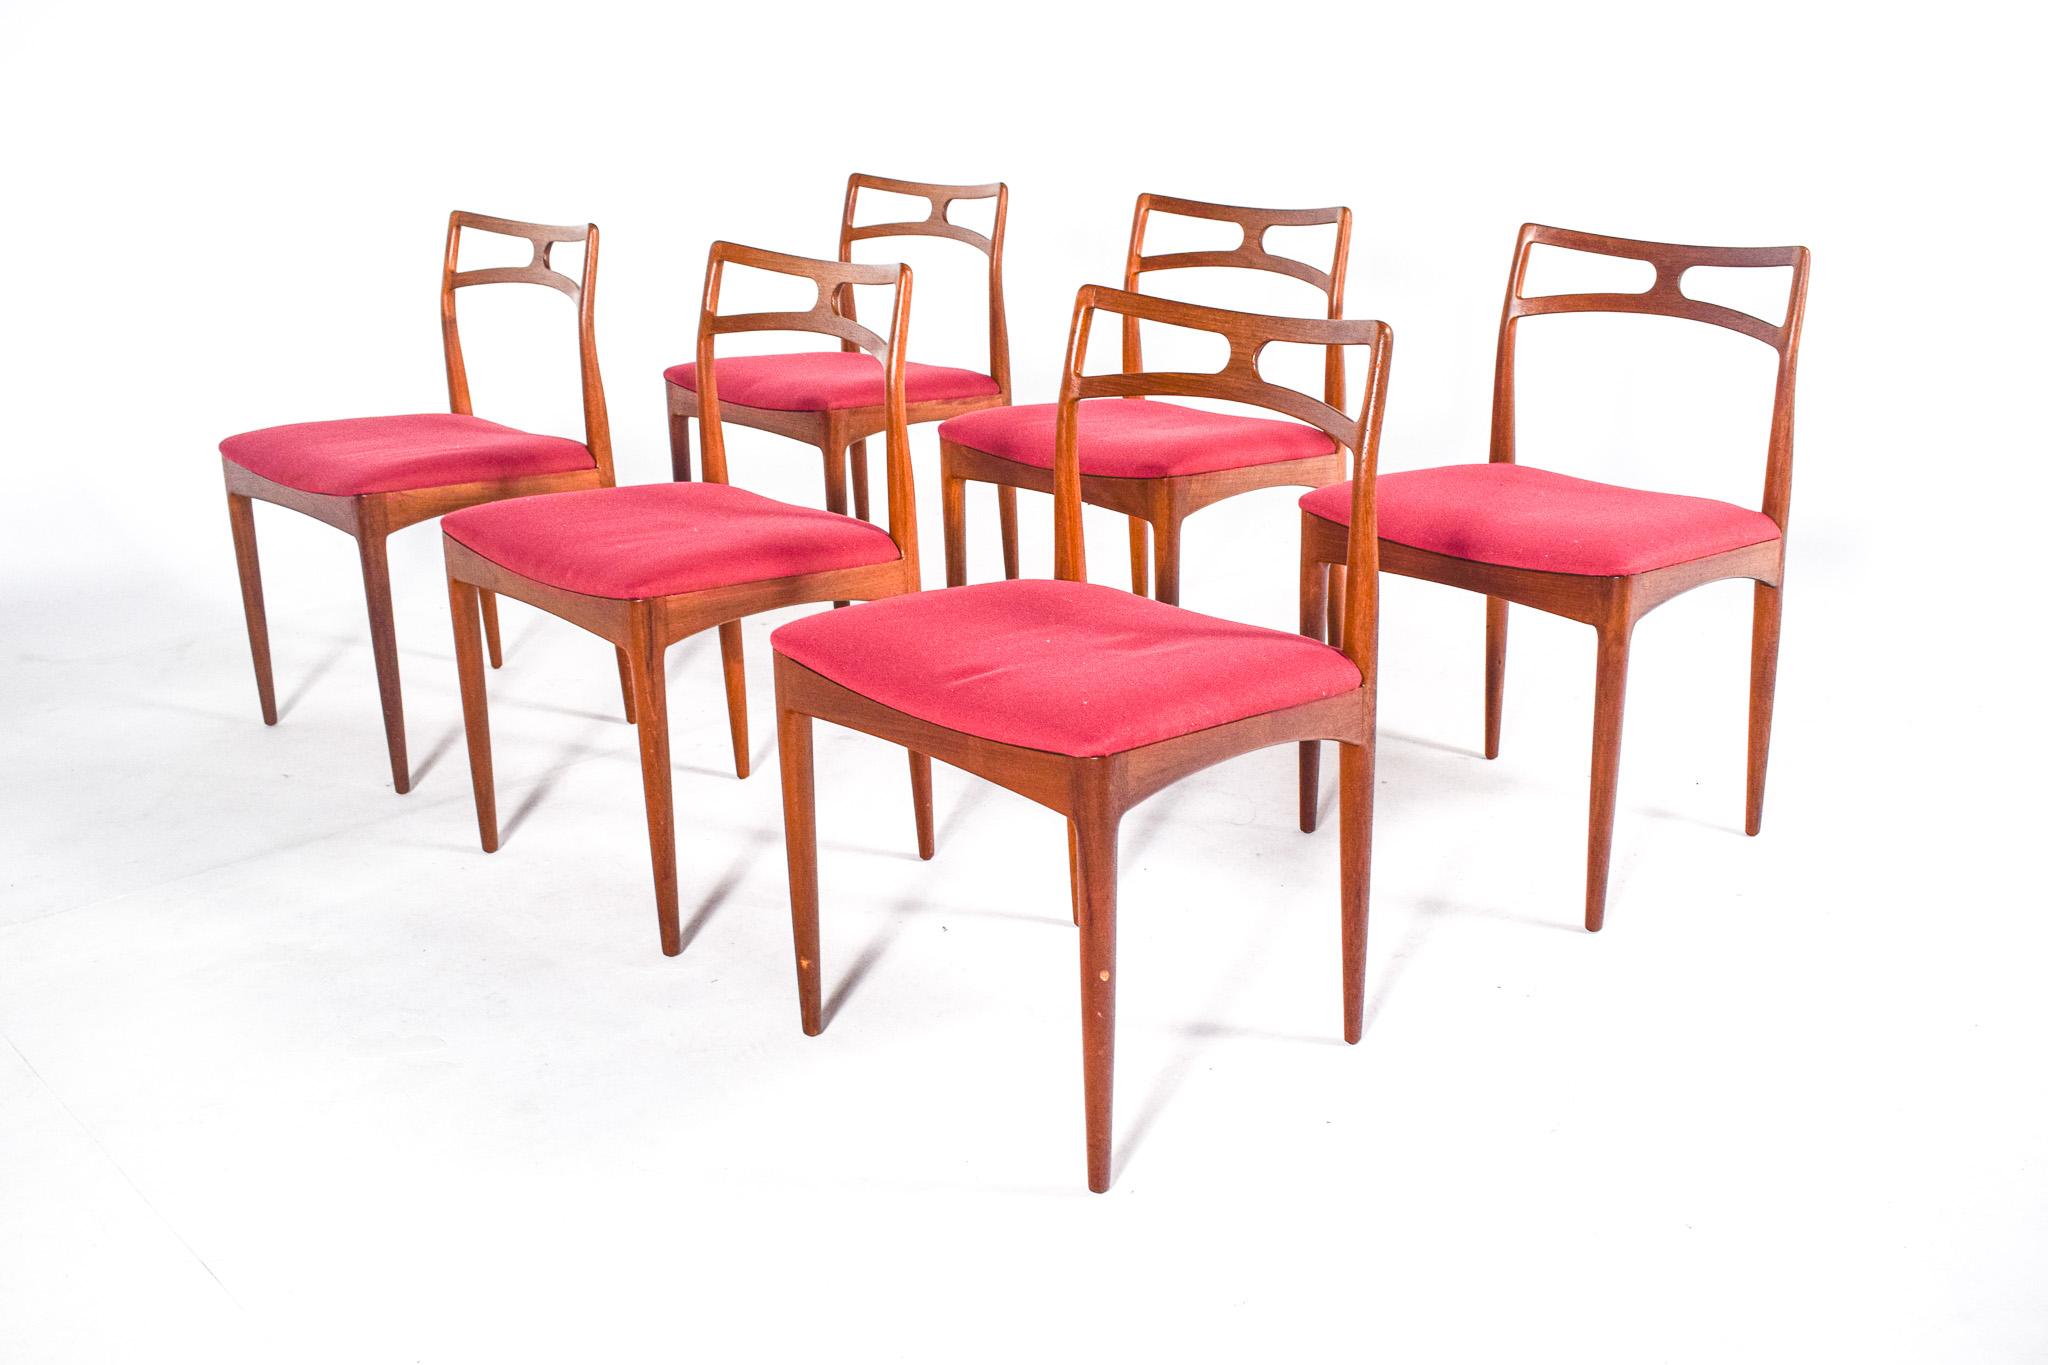 Teak dining chairs by Johannes Andersen for Christian Lindenberg
Elegant design, with a light wood structure and a red fabric cushion. Vivid teak veneer.